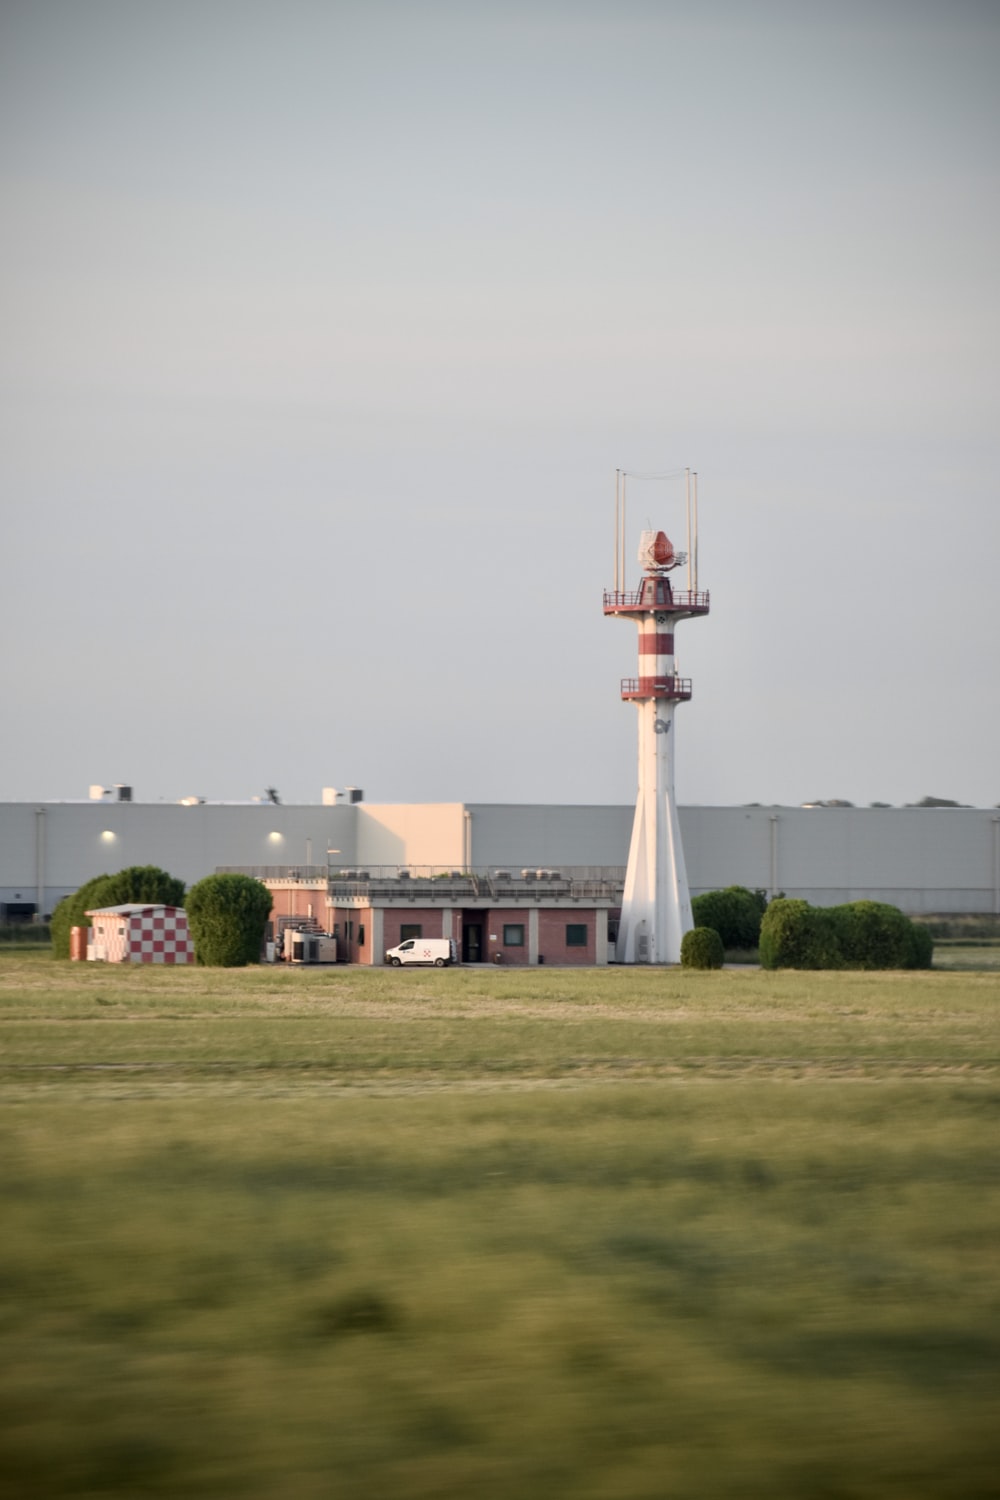 Air Traffic Control Tower Picture. Download Free Image